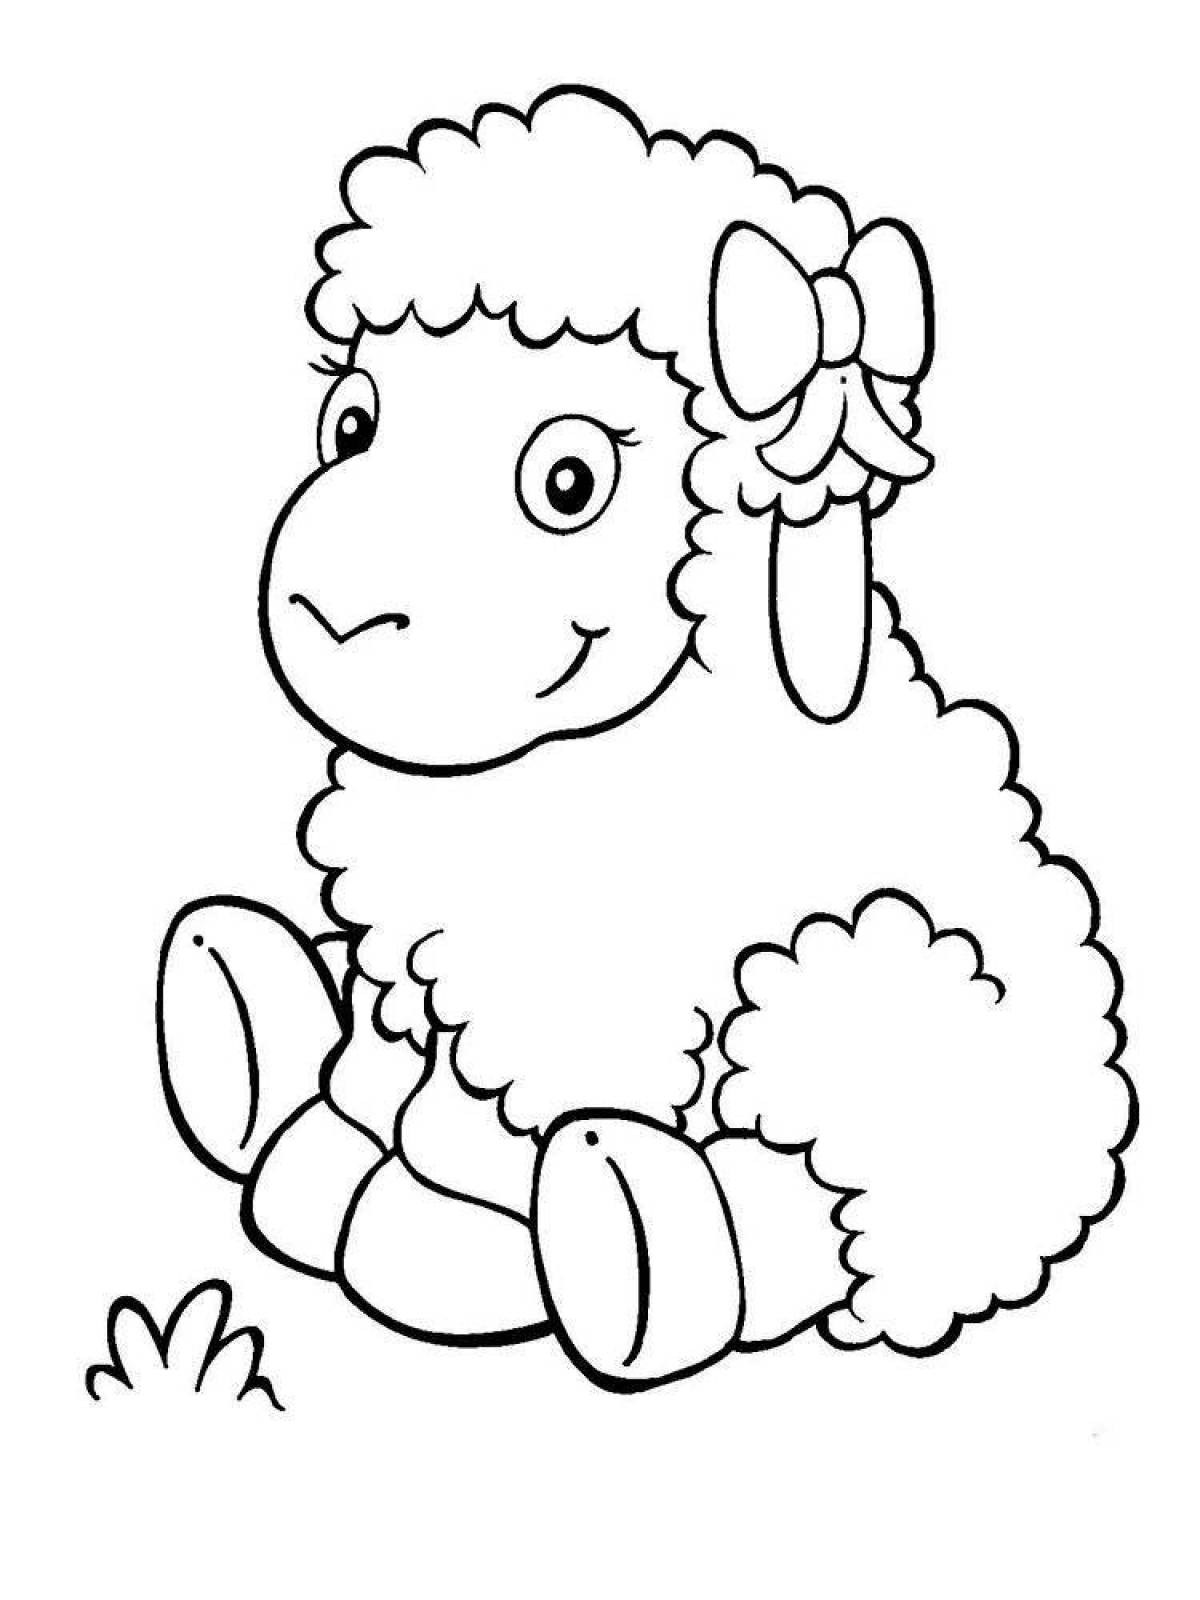 A funny lamb coloring book for kids